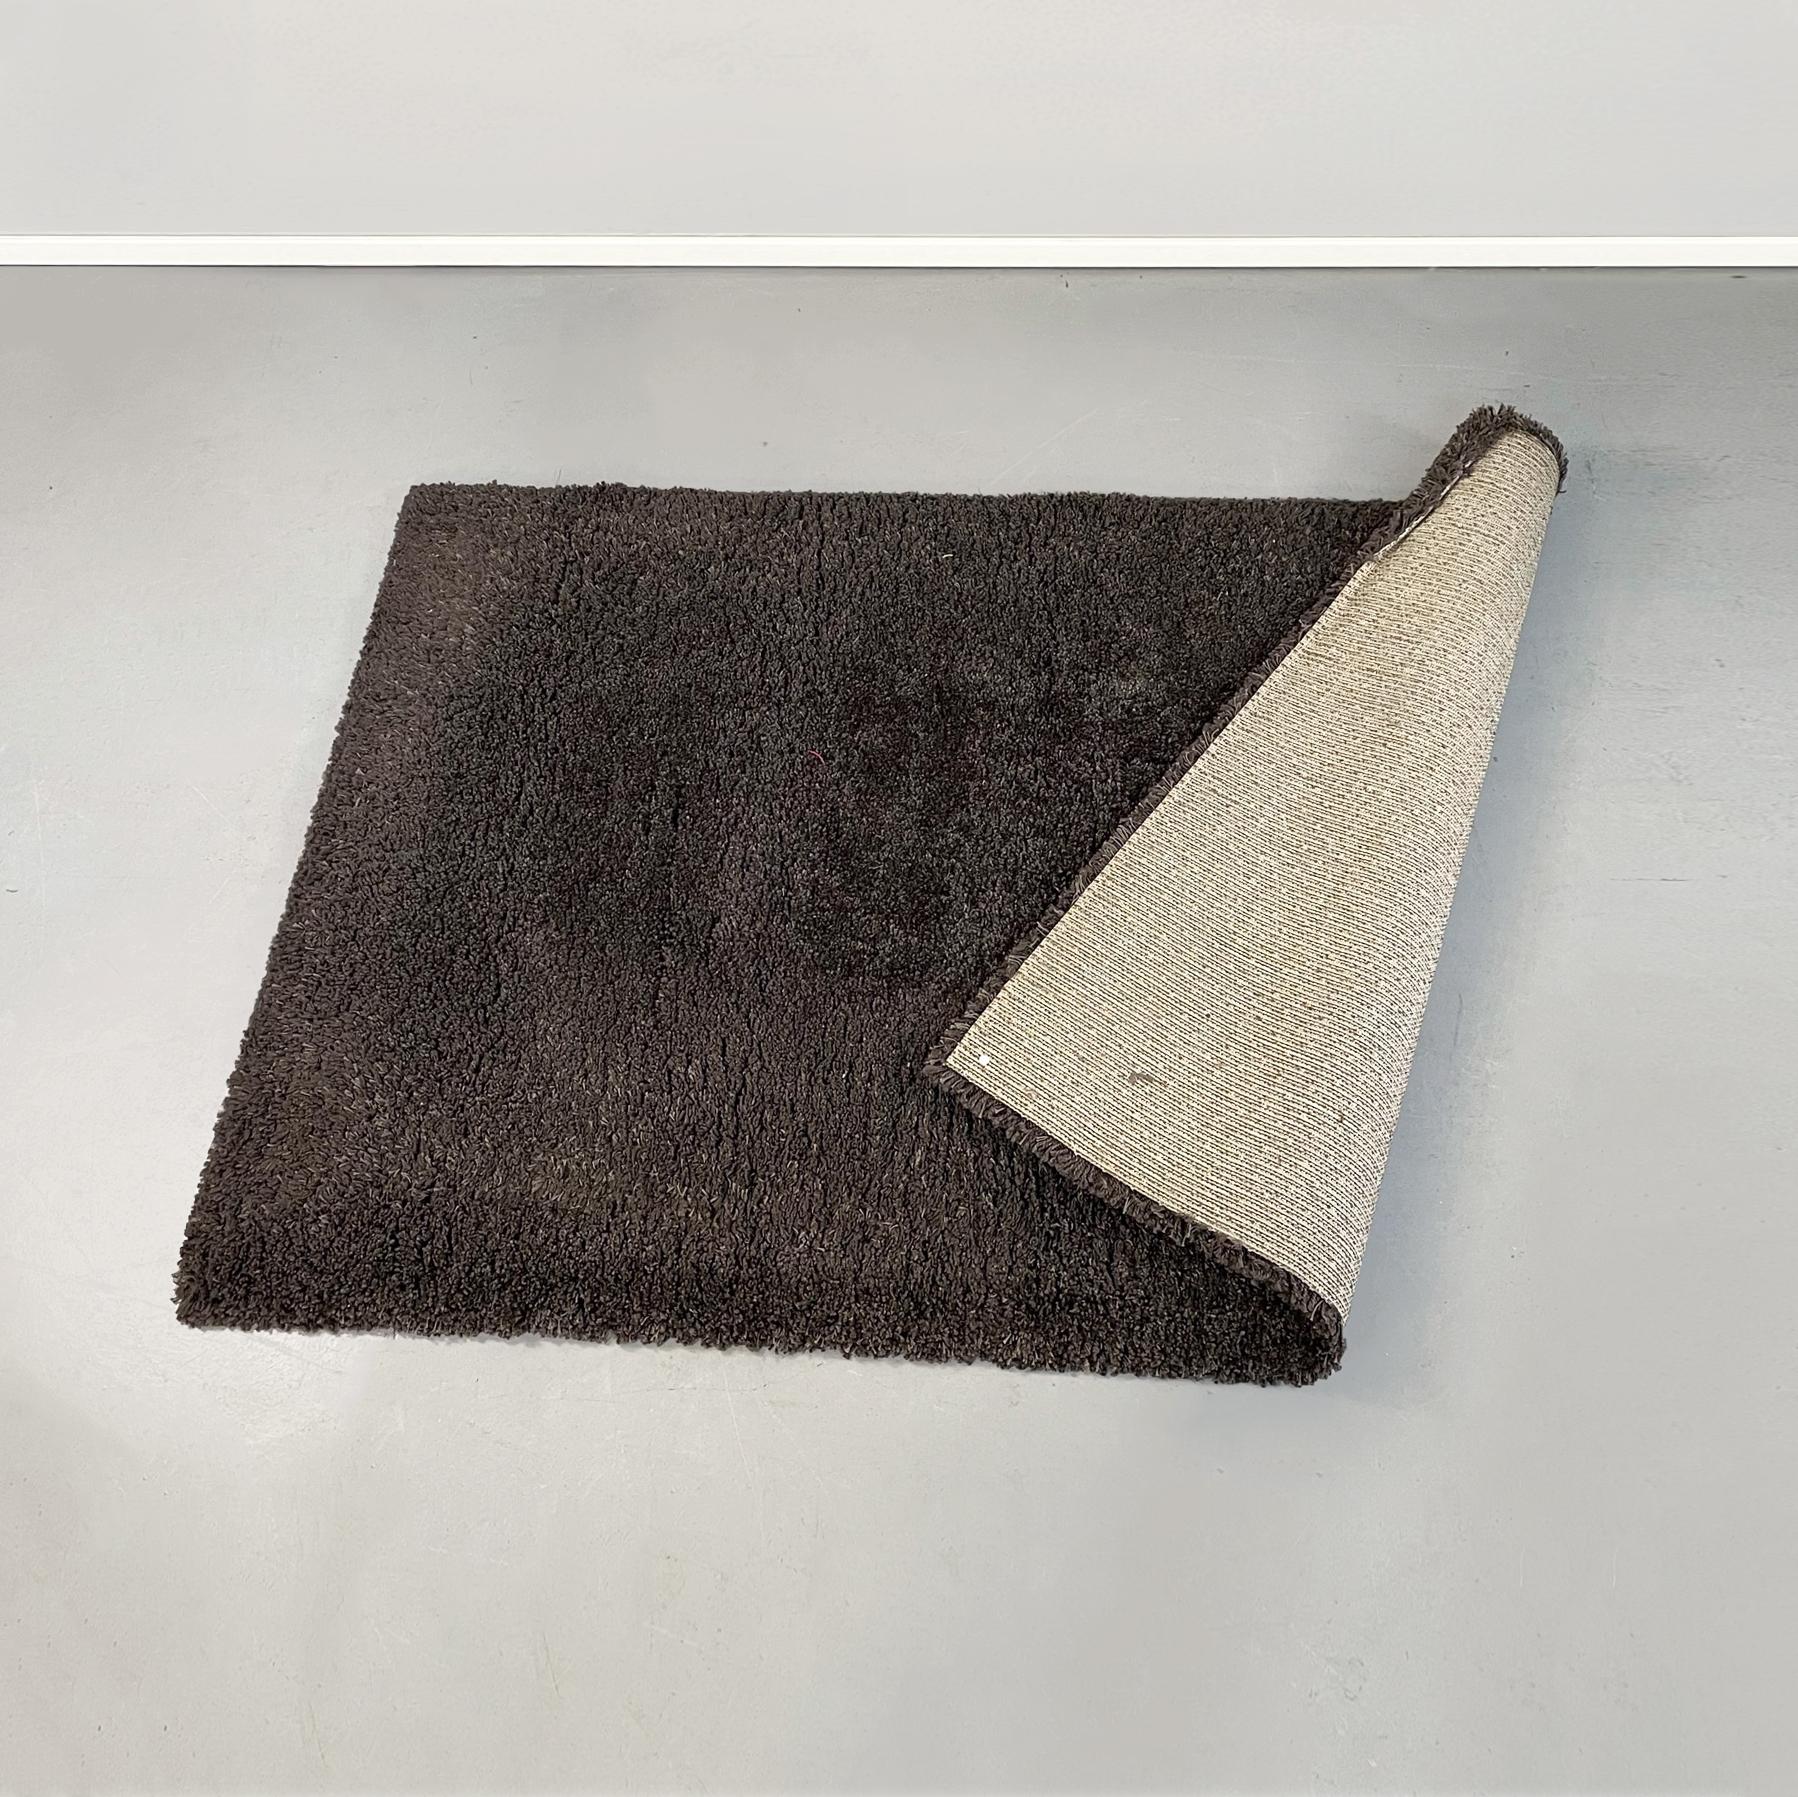 Belgian mid-century brown gray polypropylene long-haired carpet, 1970s
Rectangular long-haired rug in brown-gray polypropylene.
Produced in Belgium in 1970s.
Very good conditions
Measurements in cm 230x160
    